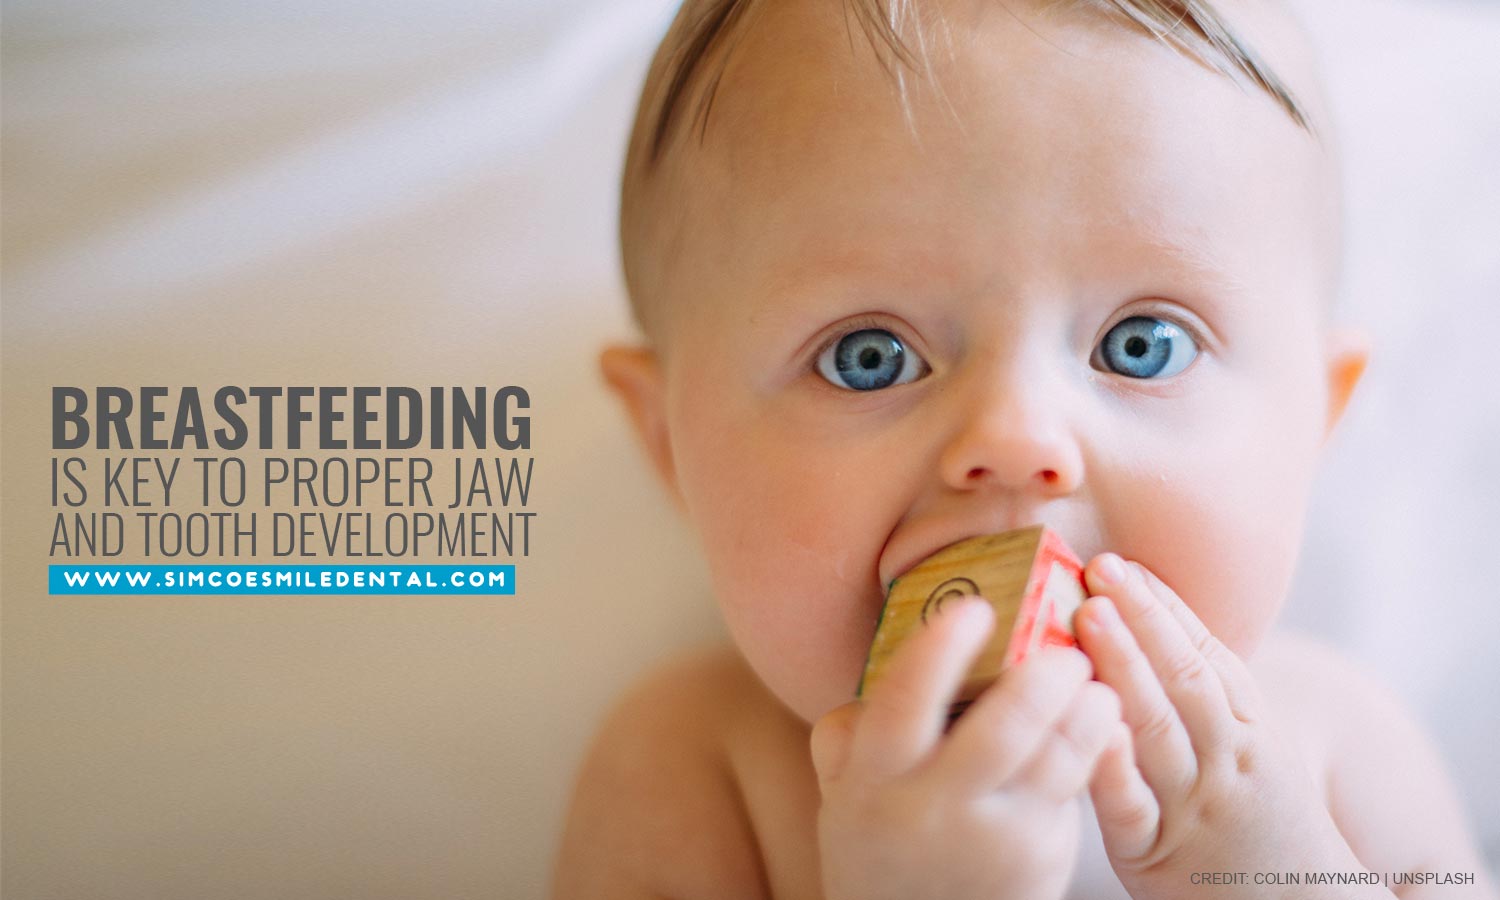 Breastfeeding is key to proper jaw and tooth development